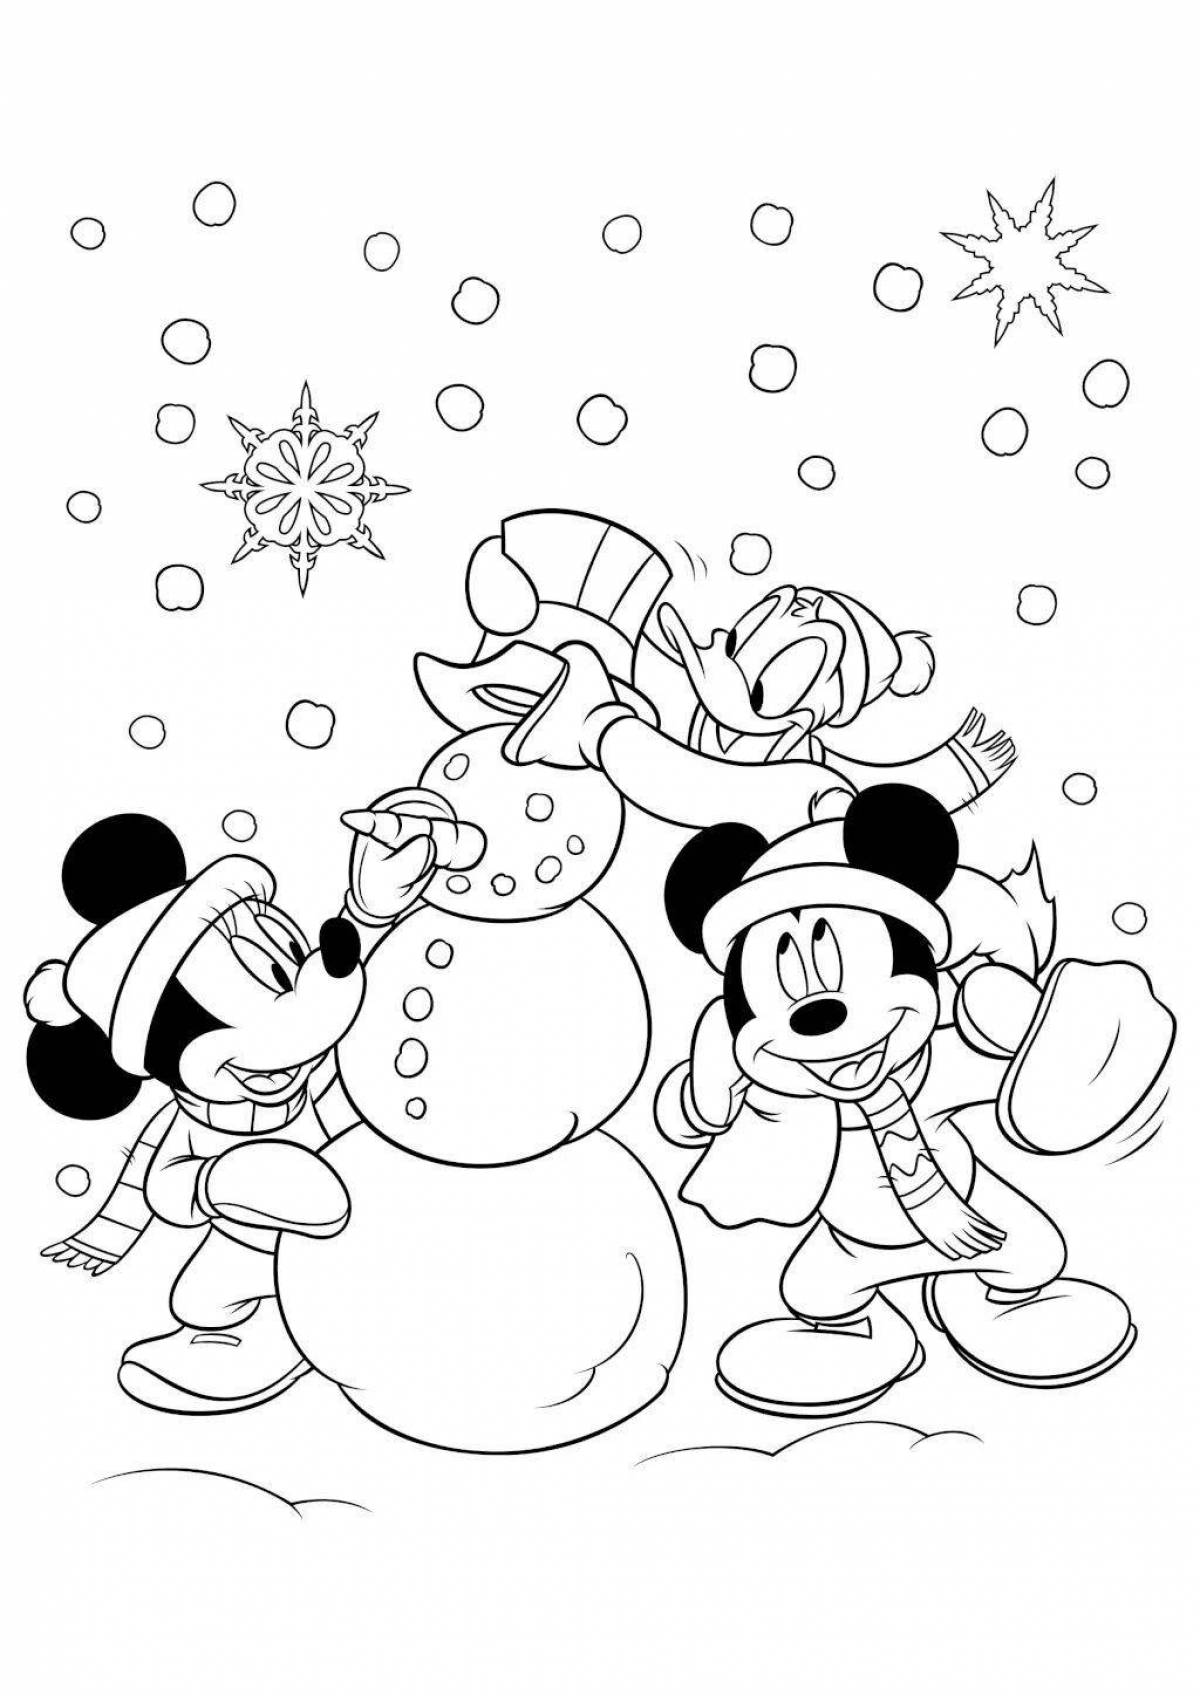 Coloring book joyful mickey mouse new year